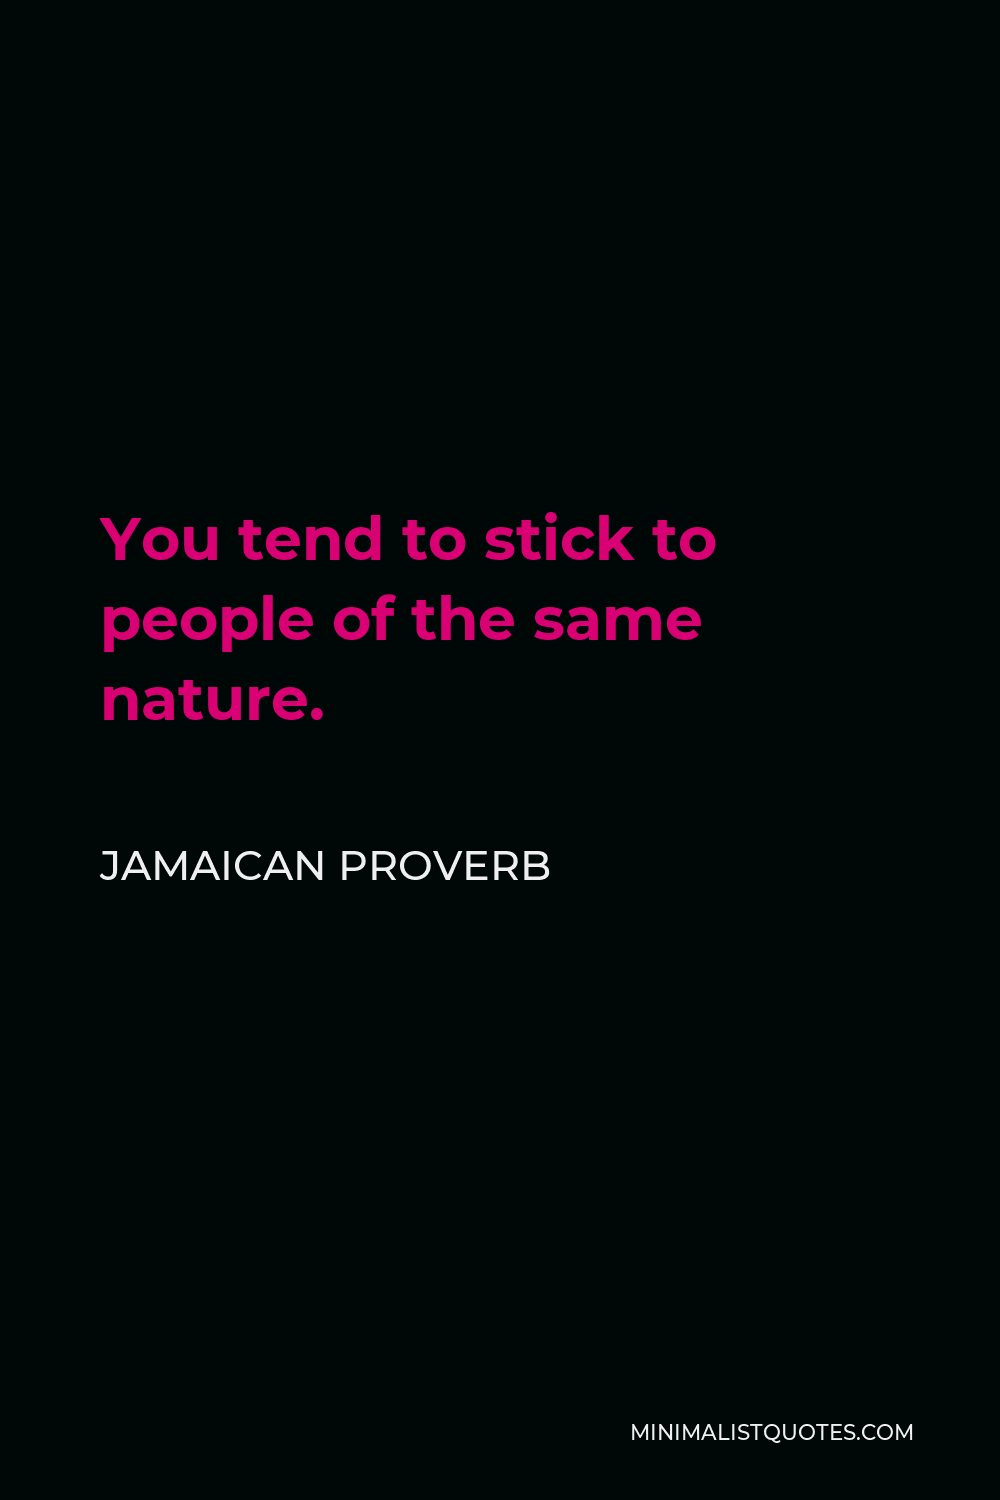 Jamaican Proverb Quote - You tend to stick to people of the same nature.